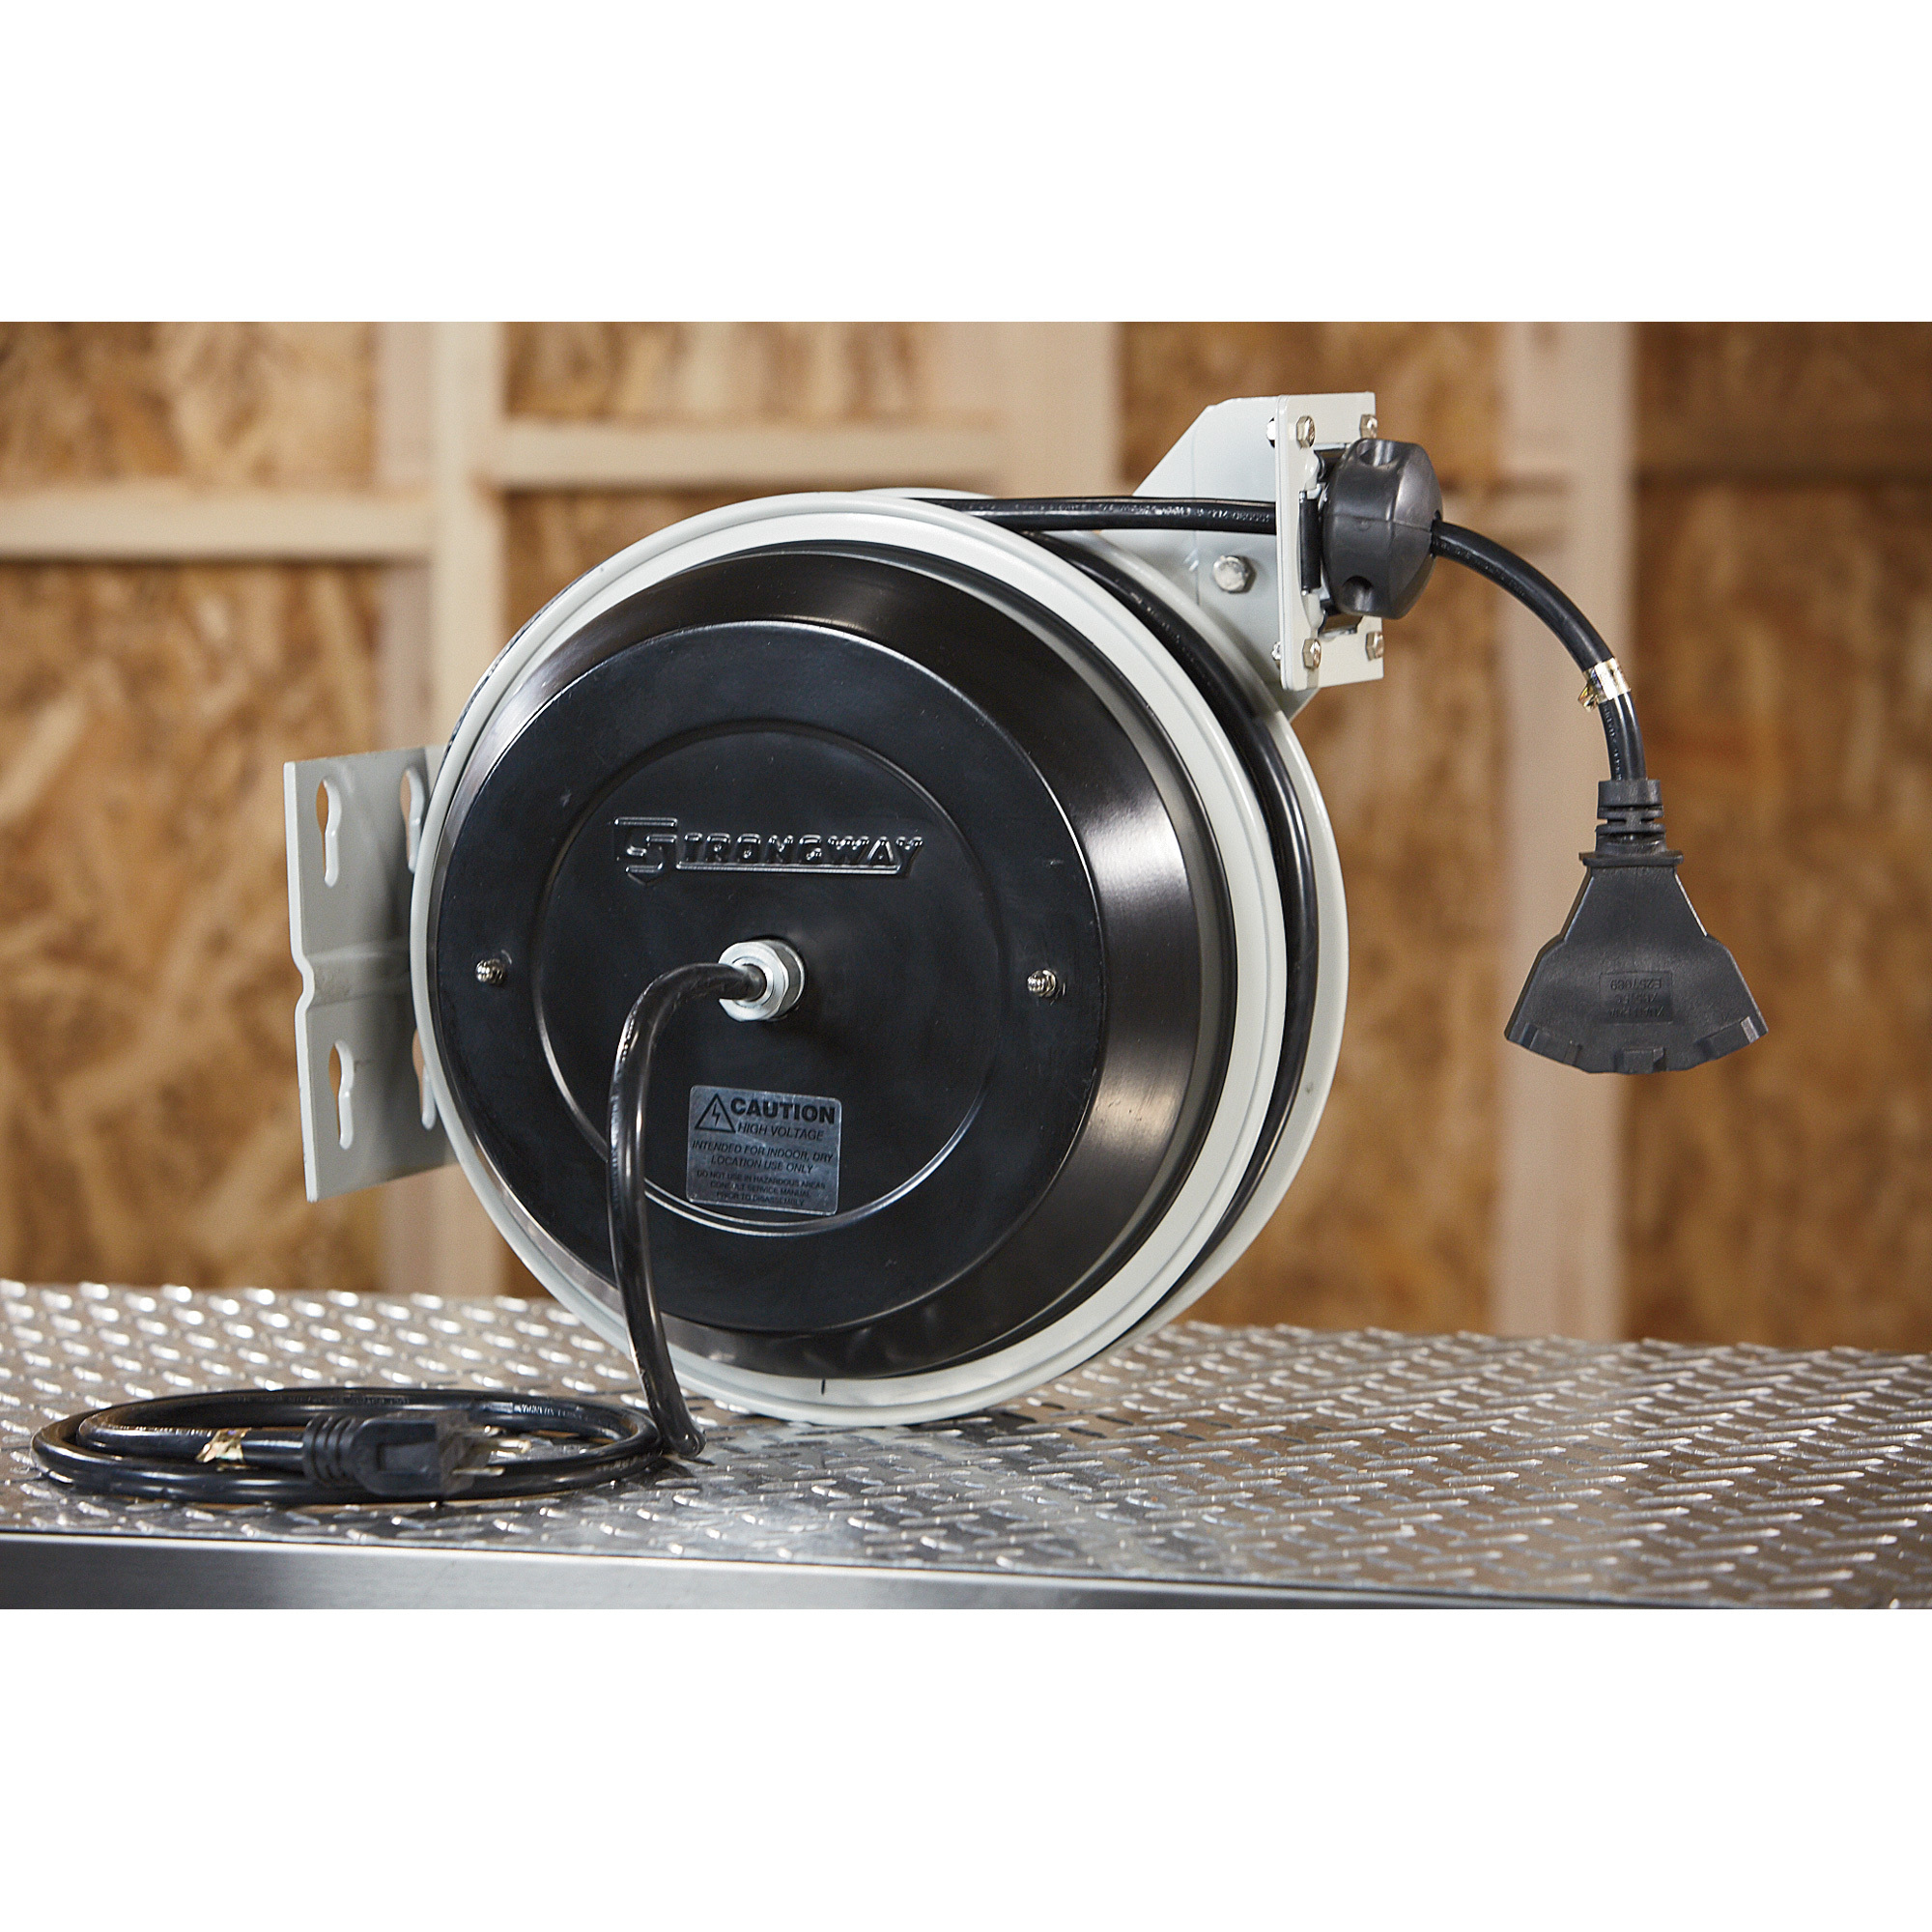 Strongway Heavy-Duty Retractable Extension Cord Reel, 50ft., 12/3, Triple  Tap